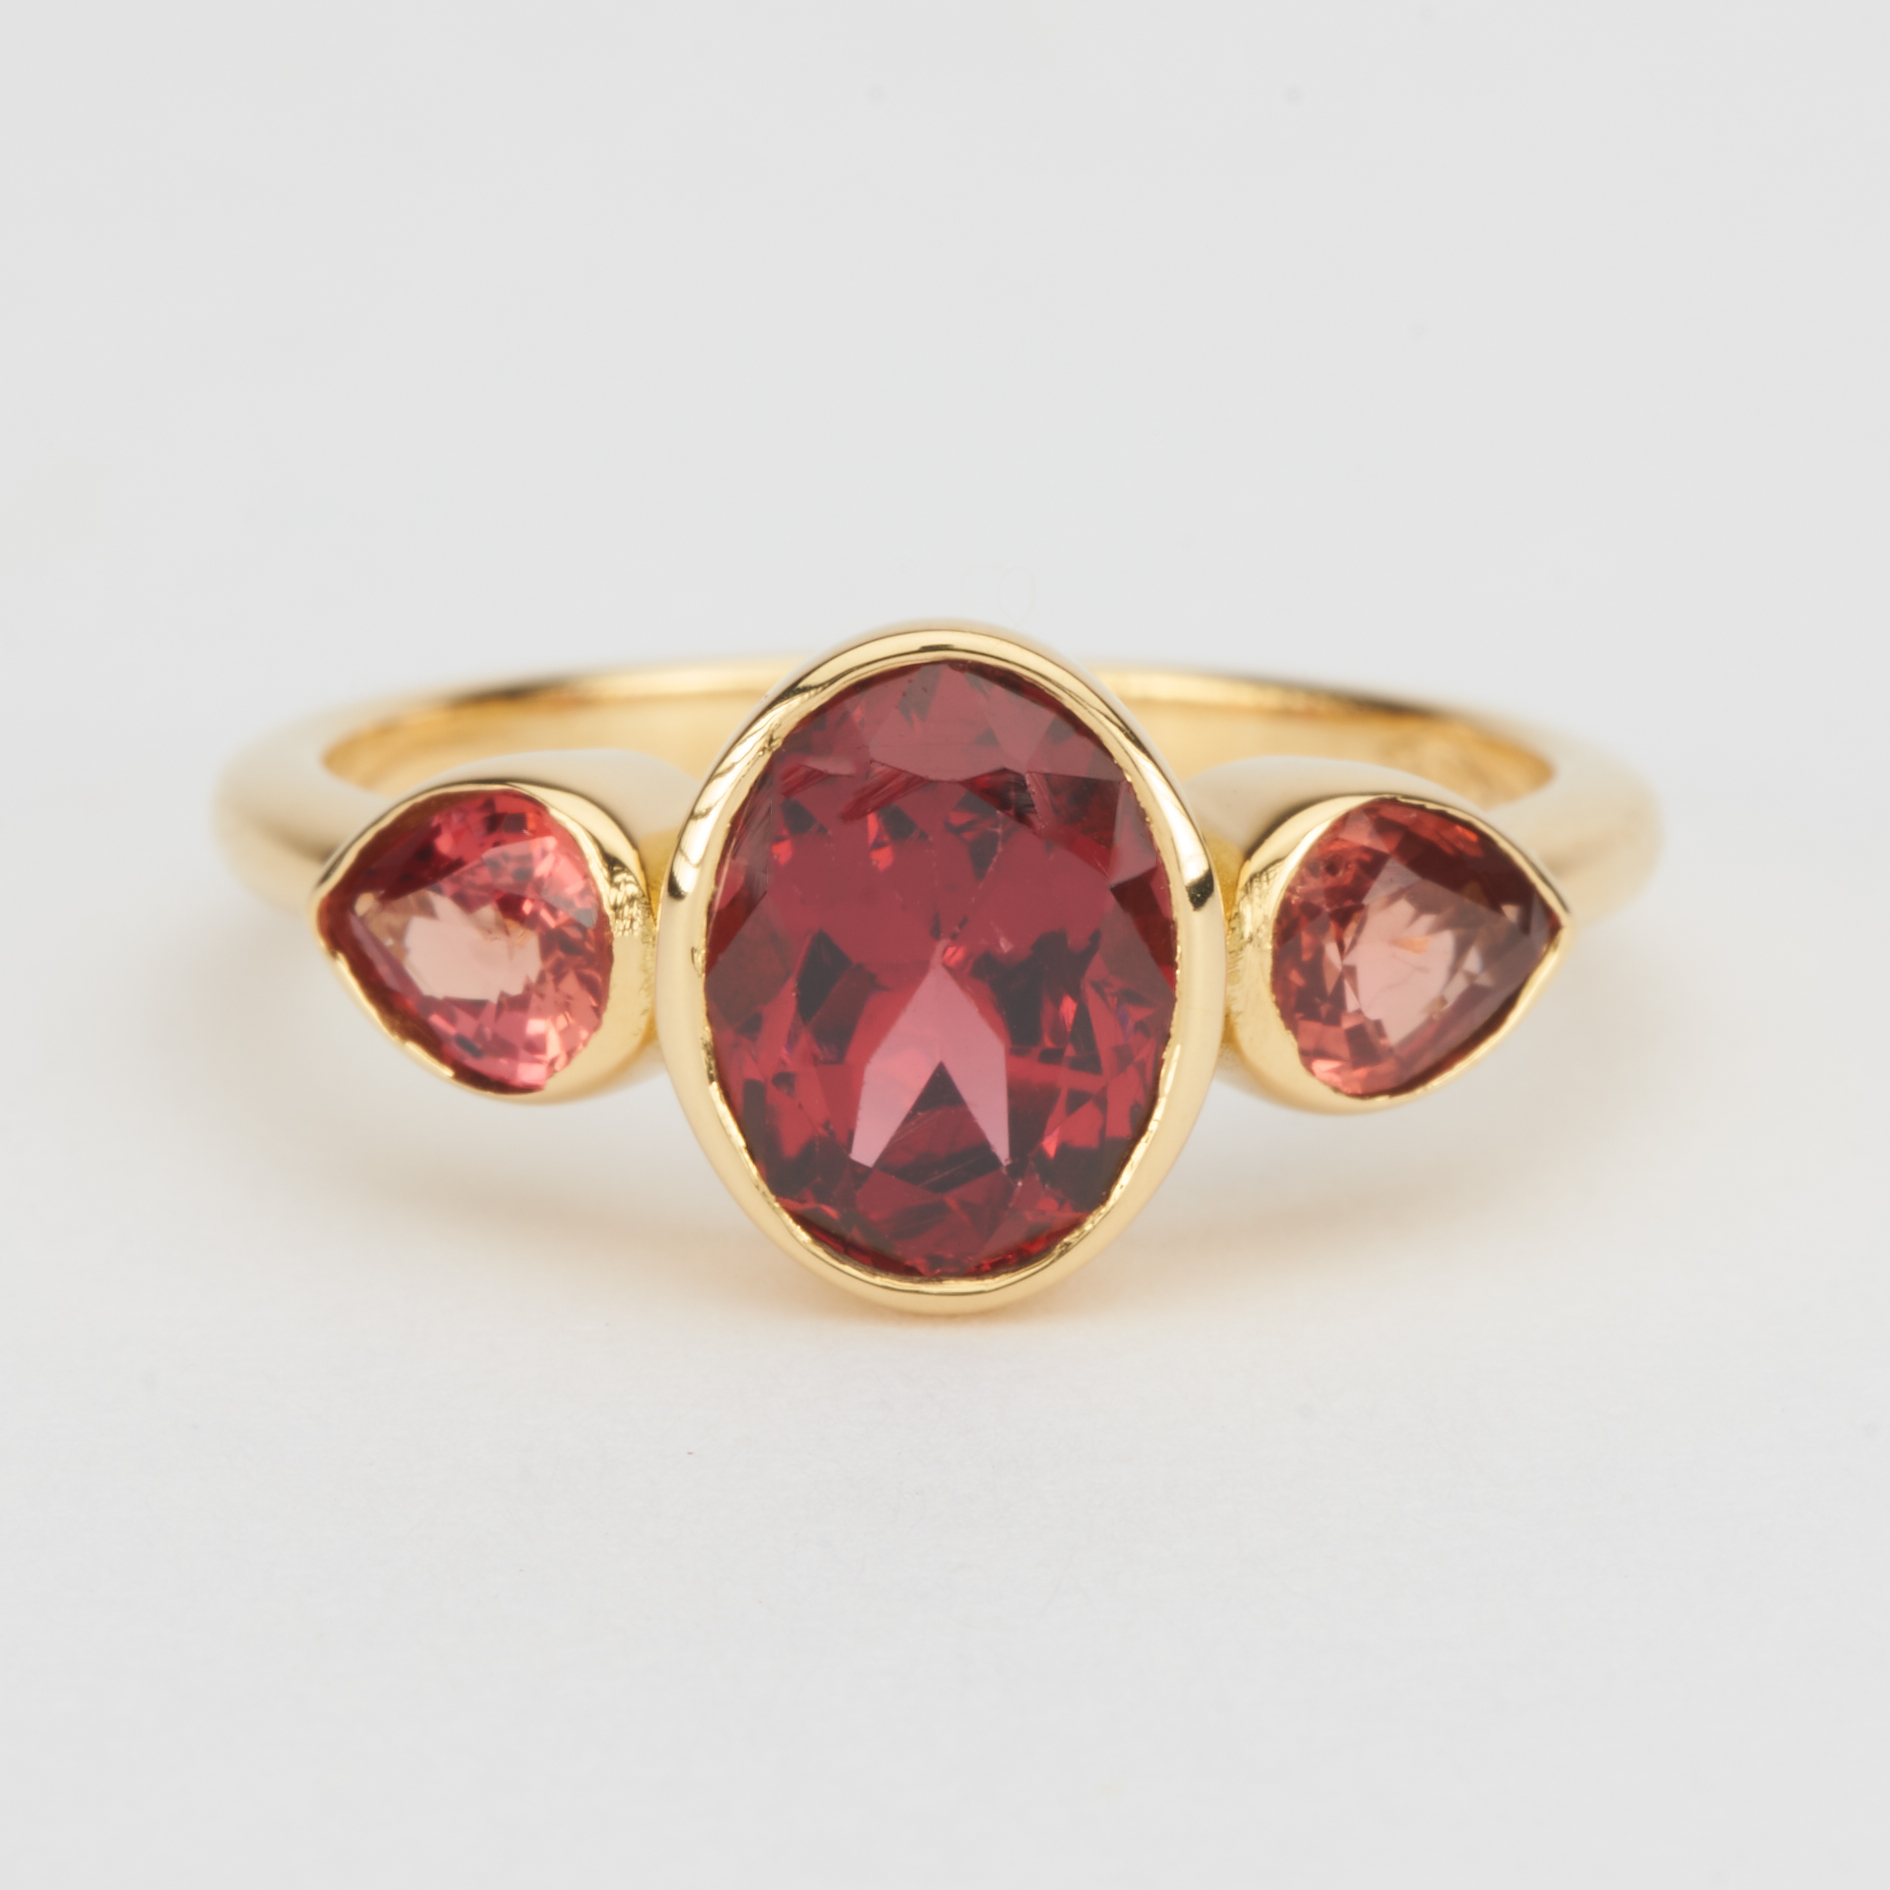 Ring : Oval shaped garnet between two beautiful juicy orange pear shaped sapphires in 18K yellow gold.